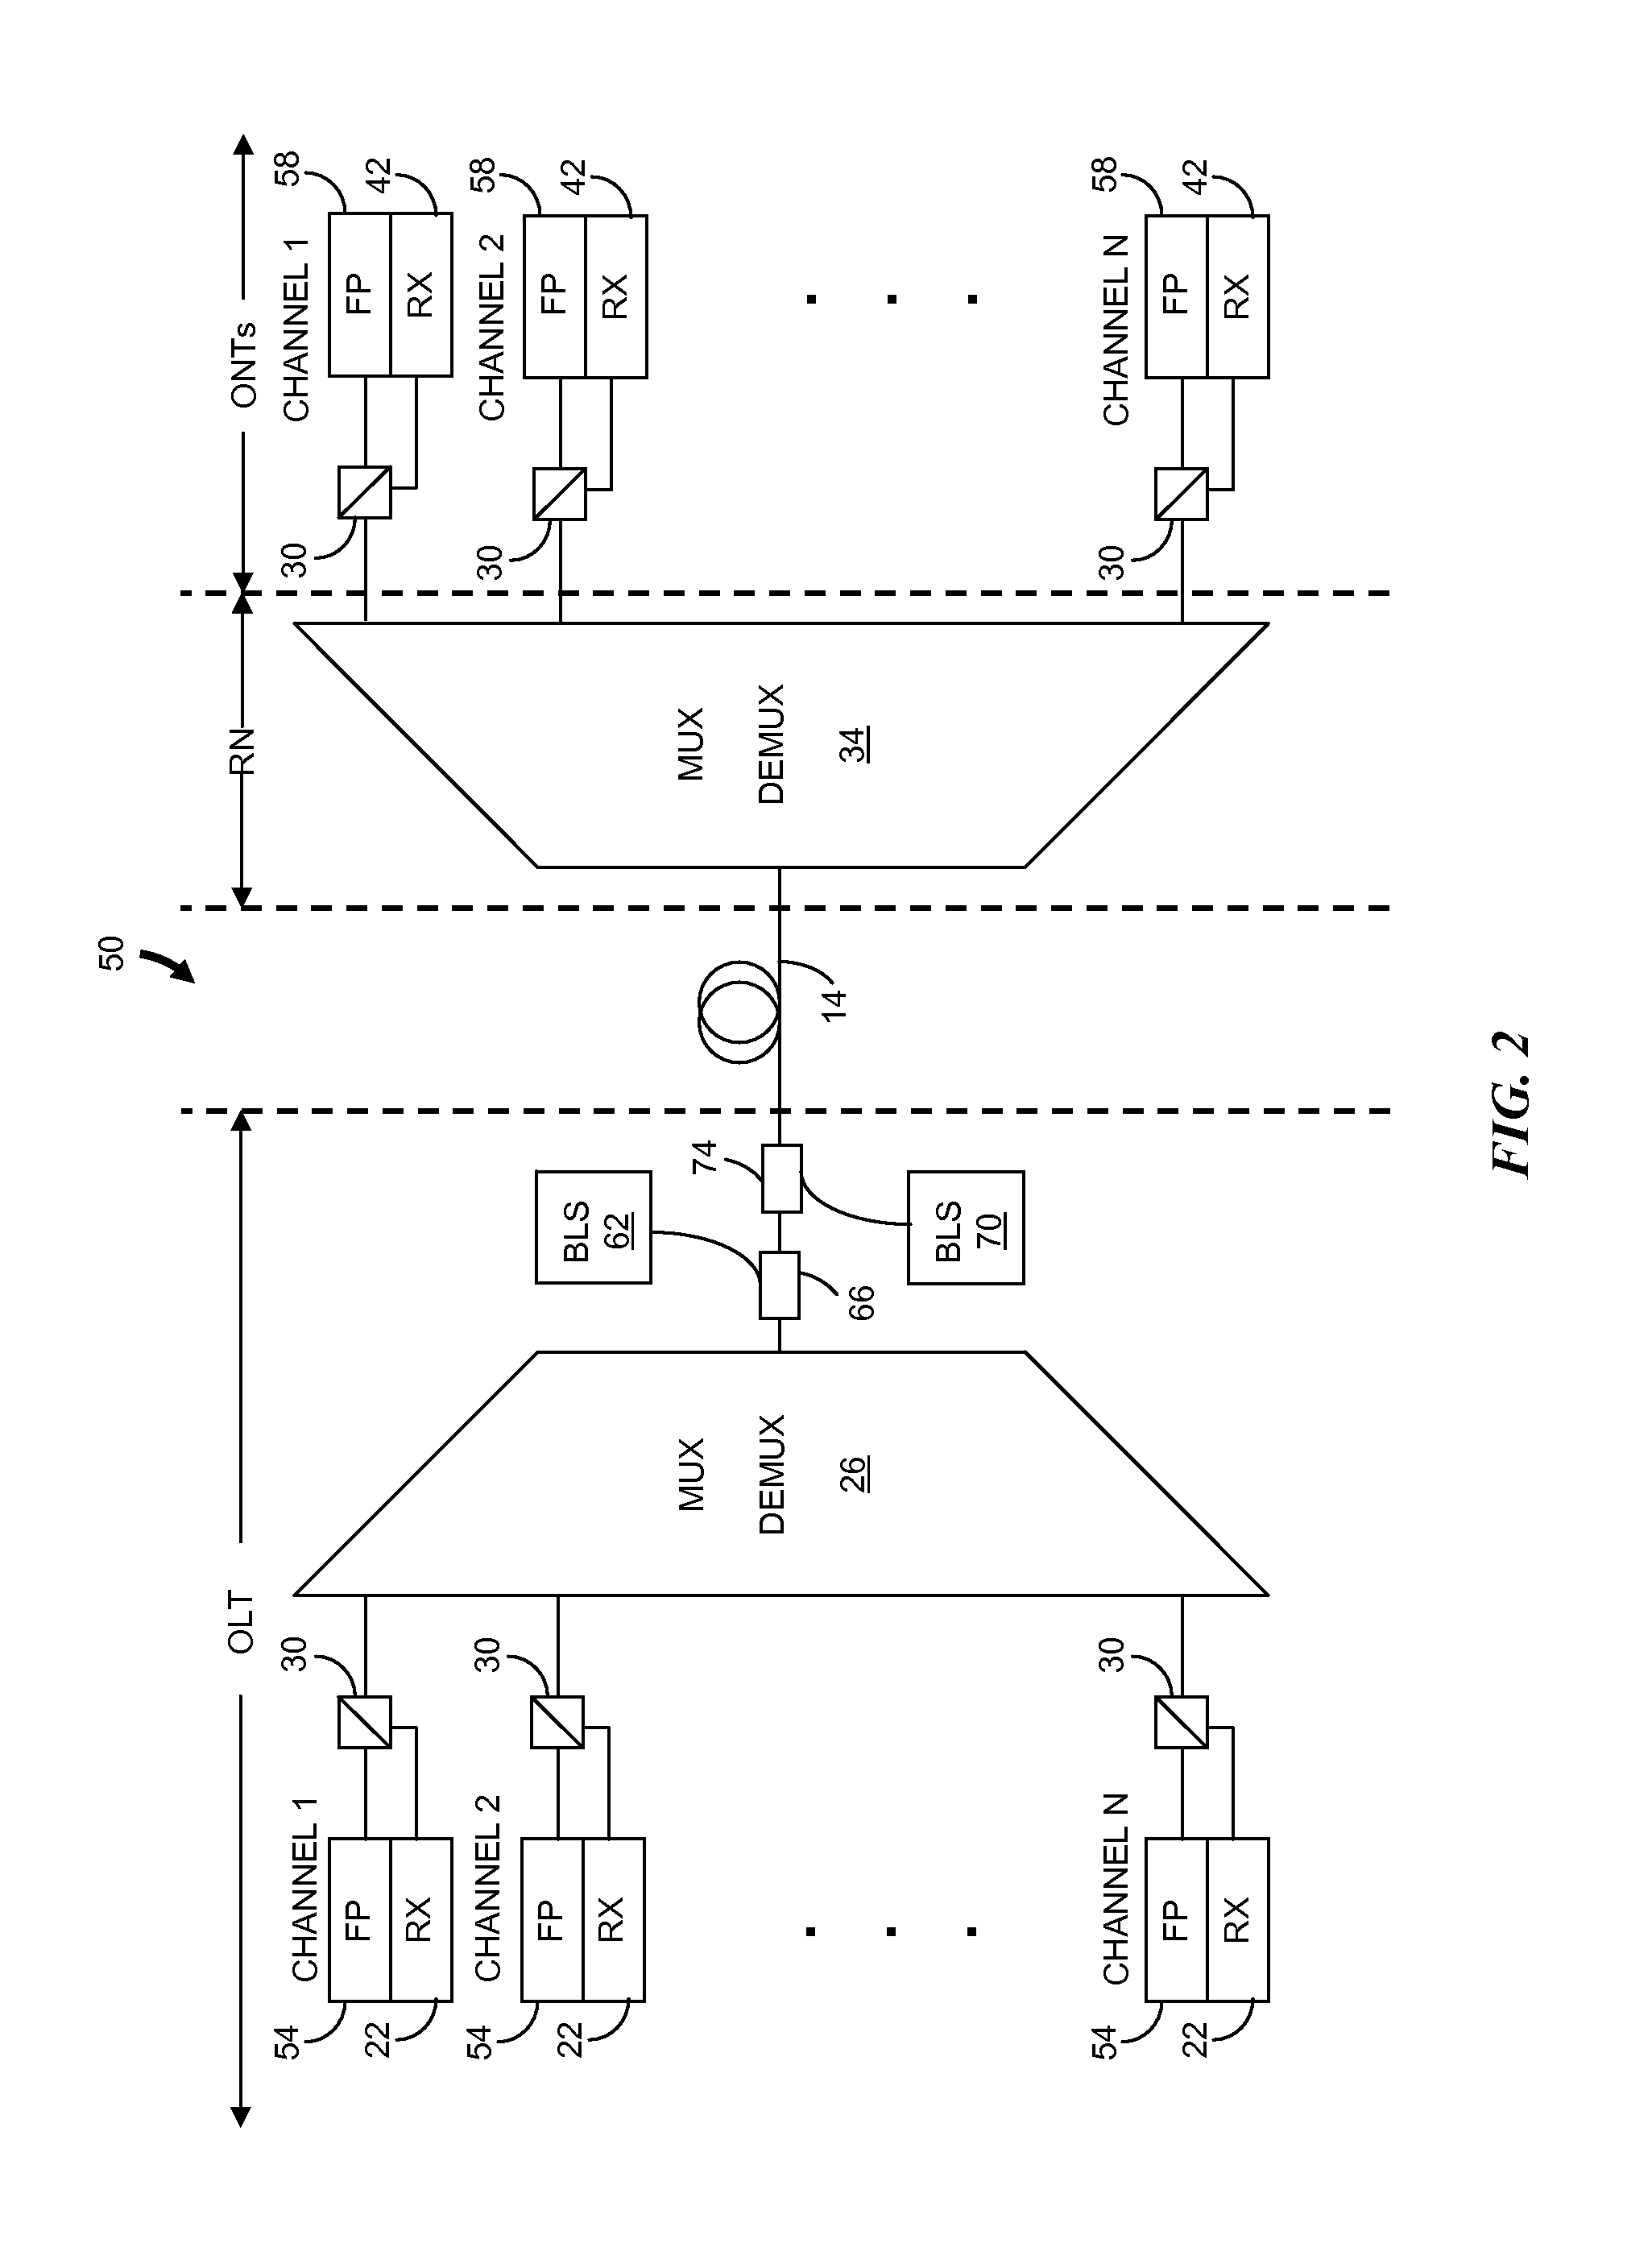 Method of Wavelength Alignment for a Wavelength Division Multiplexed Passive Optical Network